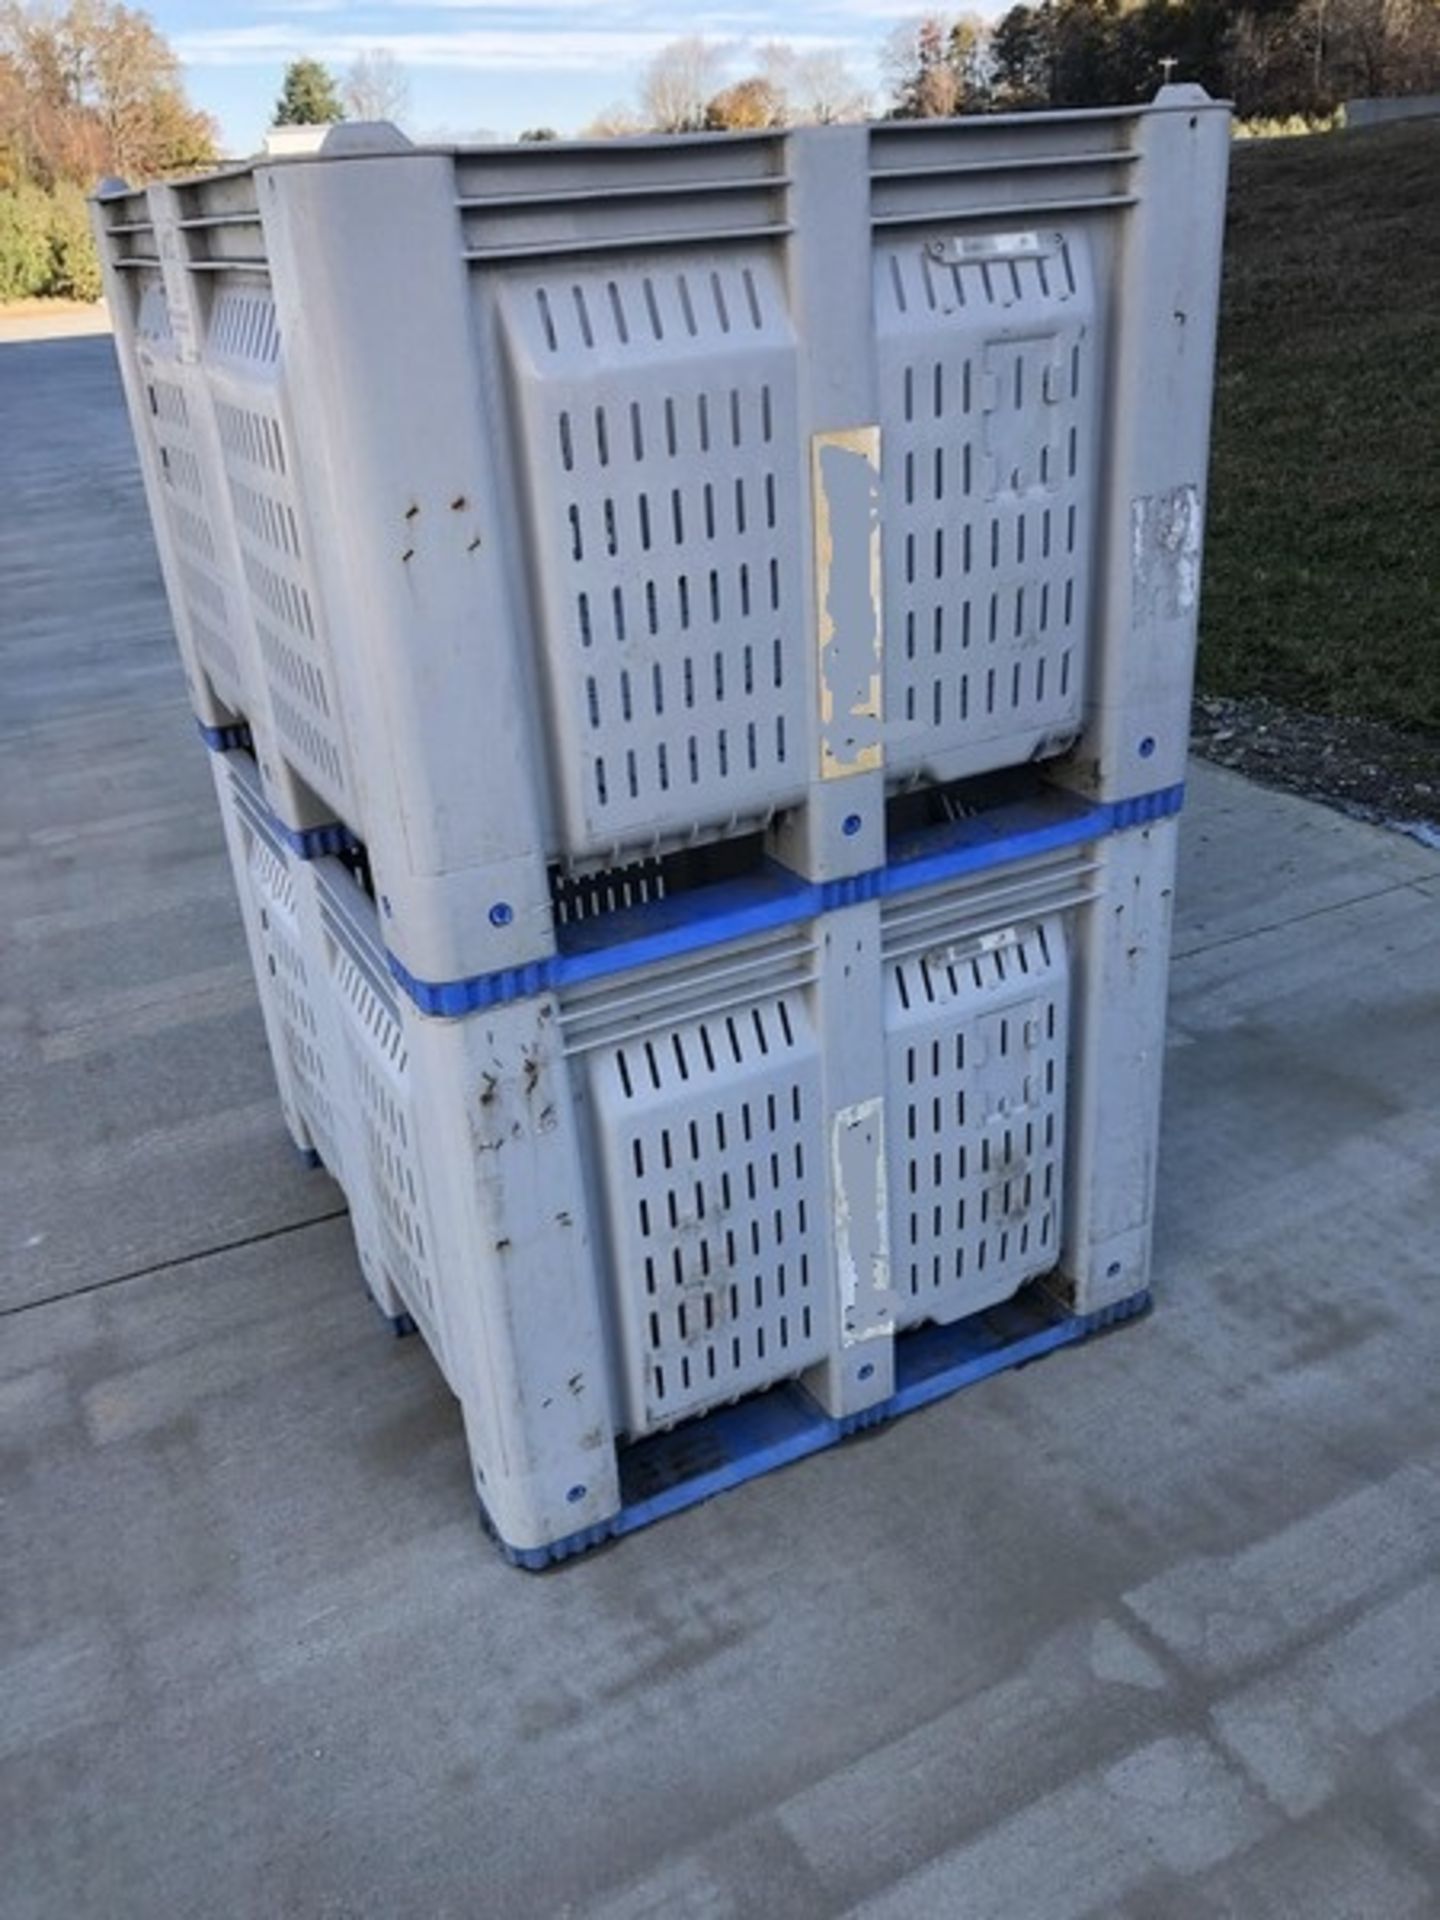 Decade Products 20-Bushel Vented MACX Stackable HDPE Produce Bins - Image 5 of 5